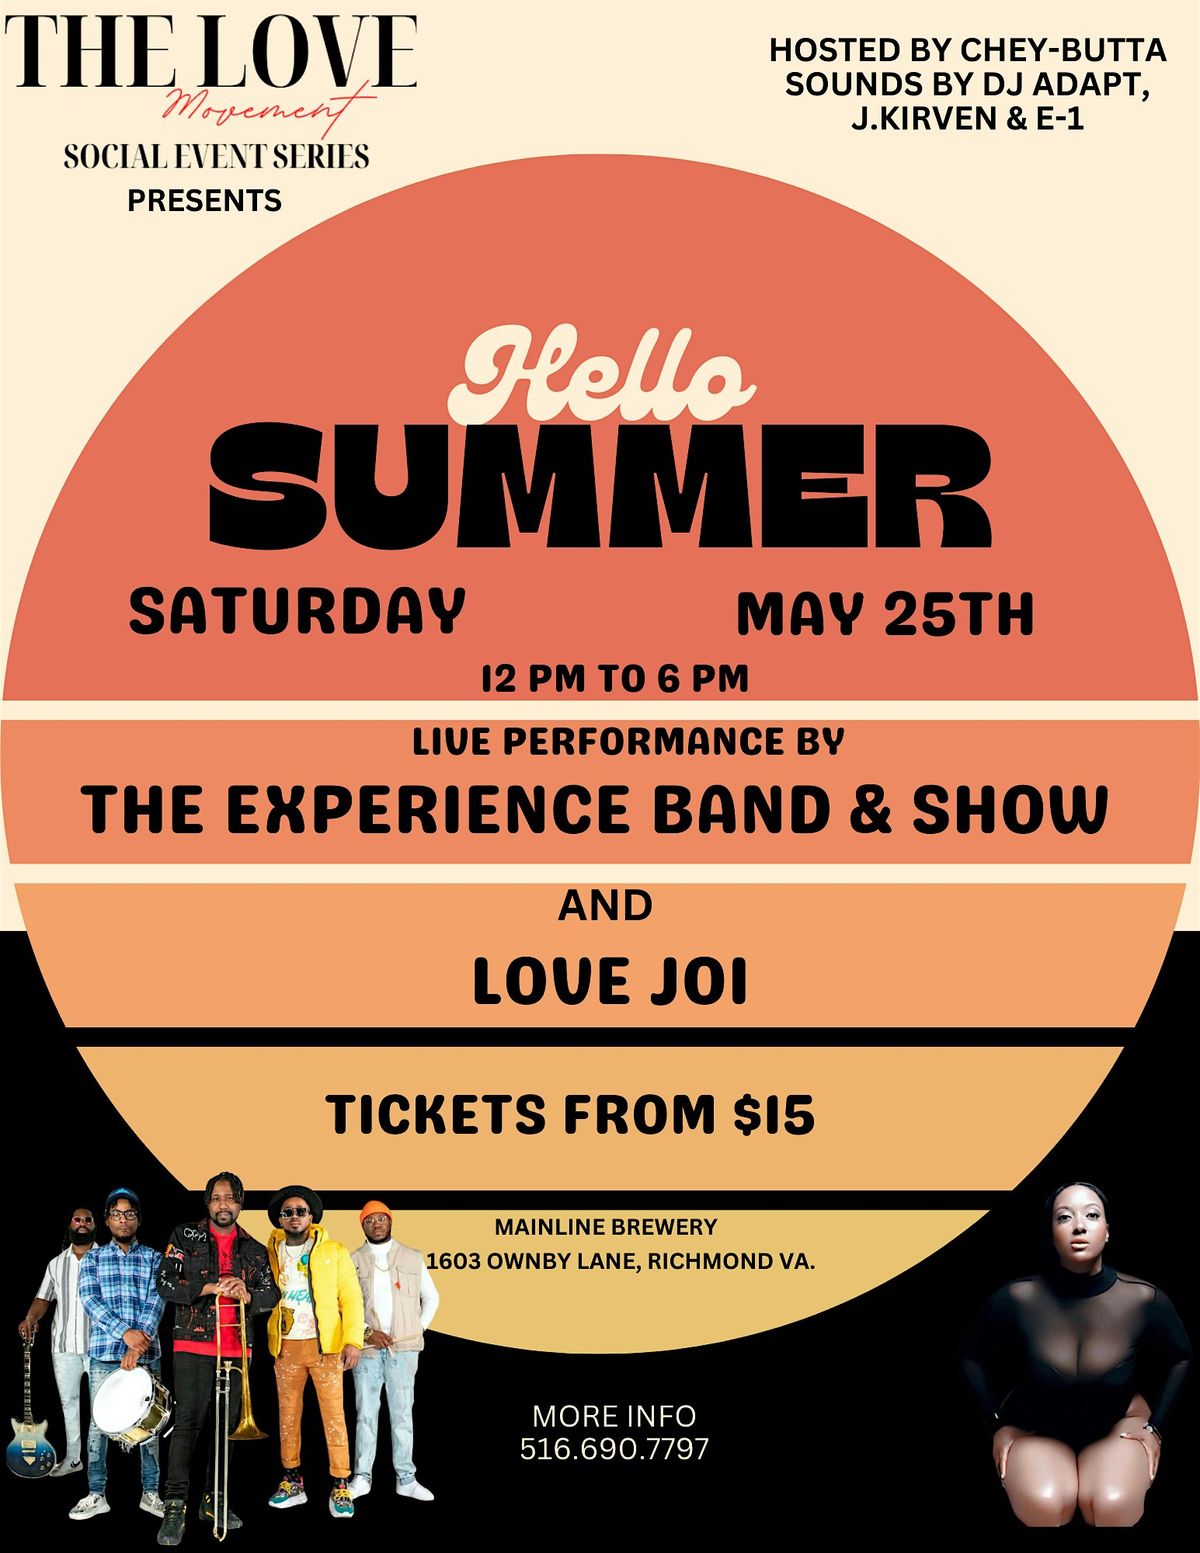 HELLO SUMMER FESTIVAL- PRESENTED BY THE LOVE MOVEMENT SOCIAL EVENT SERIES